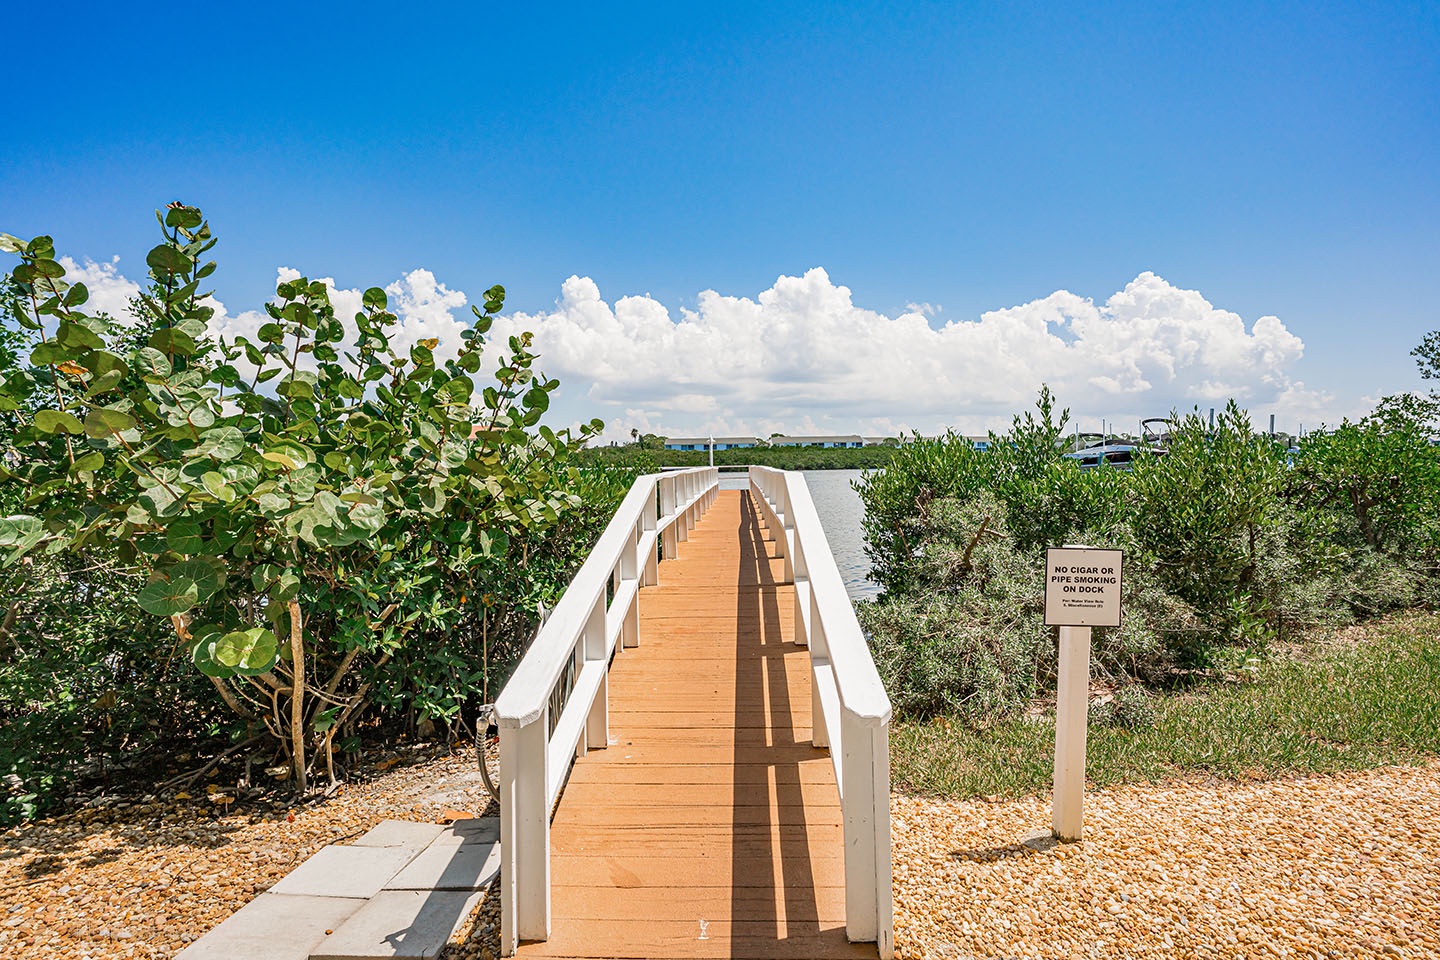 The walkway to the sitting and fishing dock on the Intracoastal Waterway.